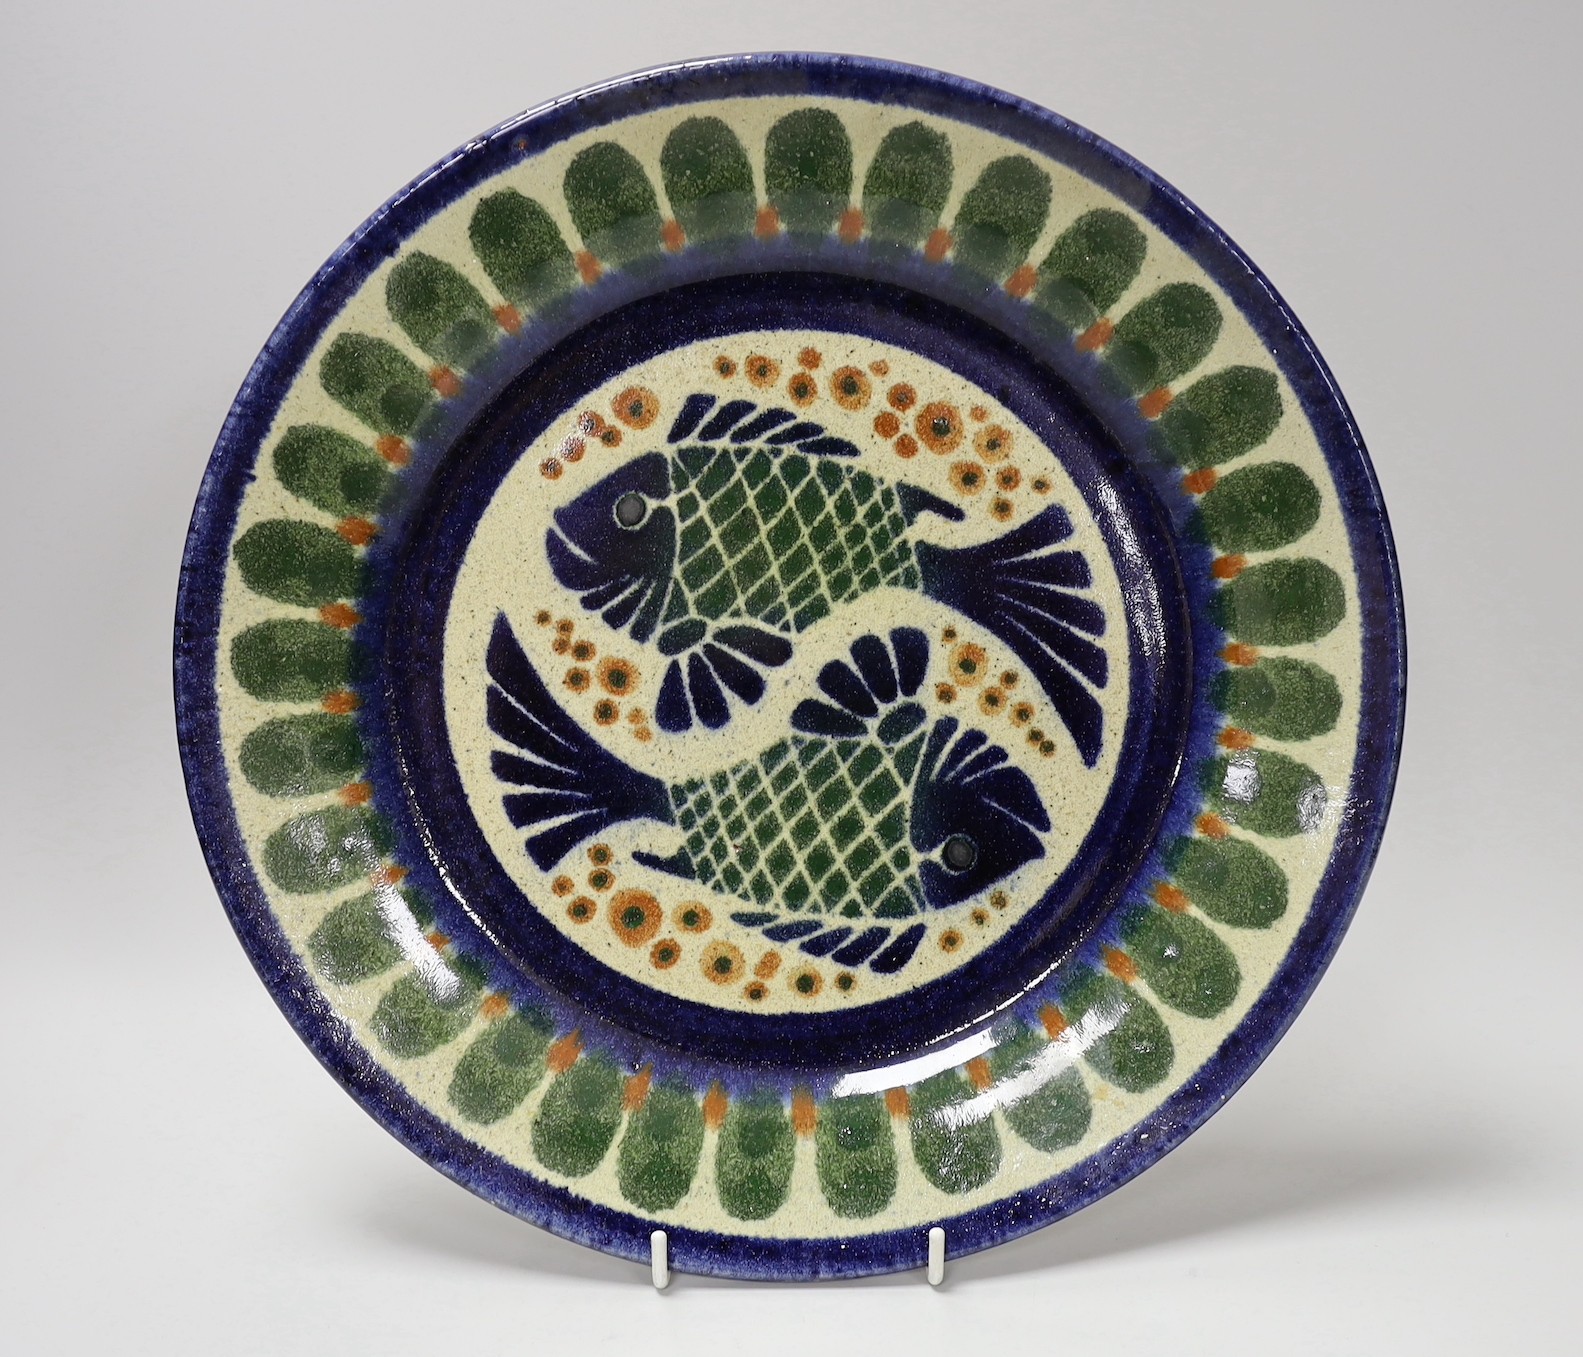 Barocco Valbonne - large painted dish, together with a Casa dos Oleiros Portuguese plate, largest 35cm across